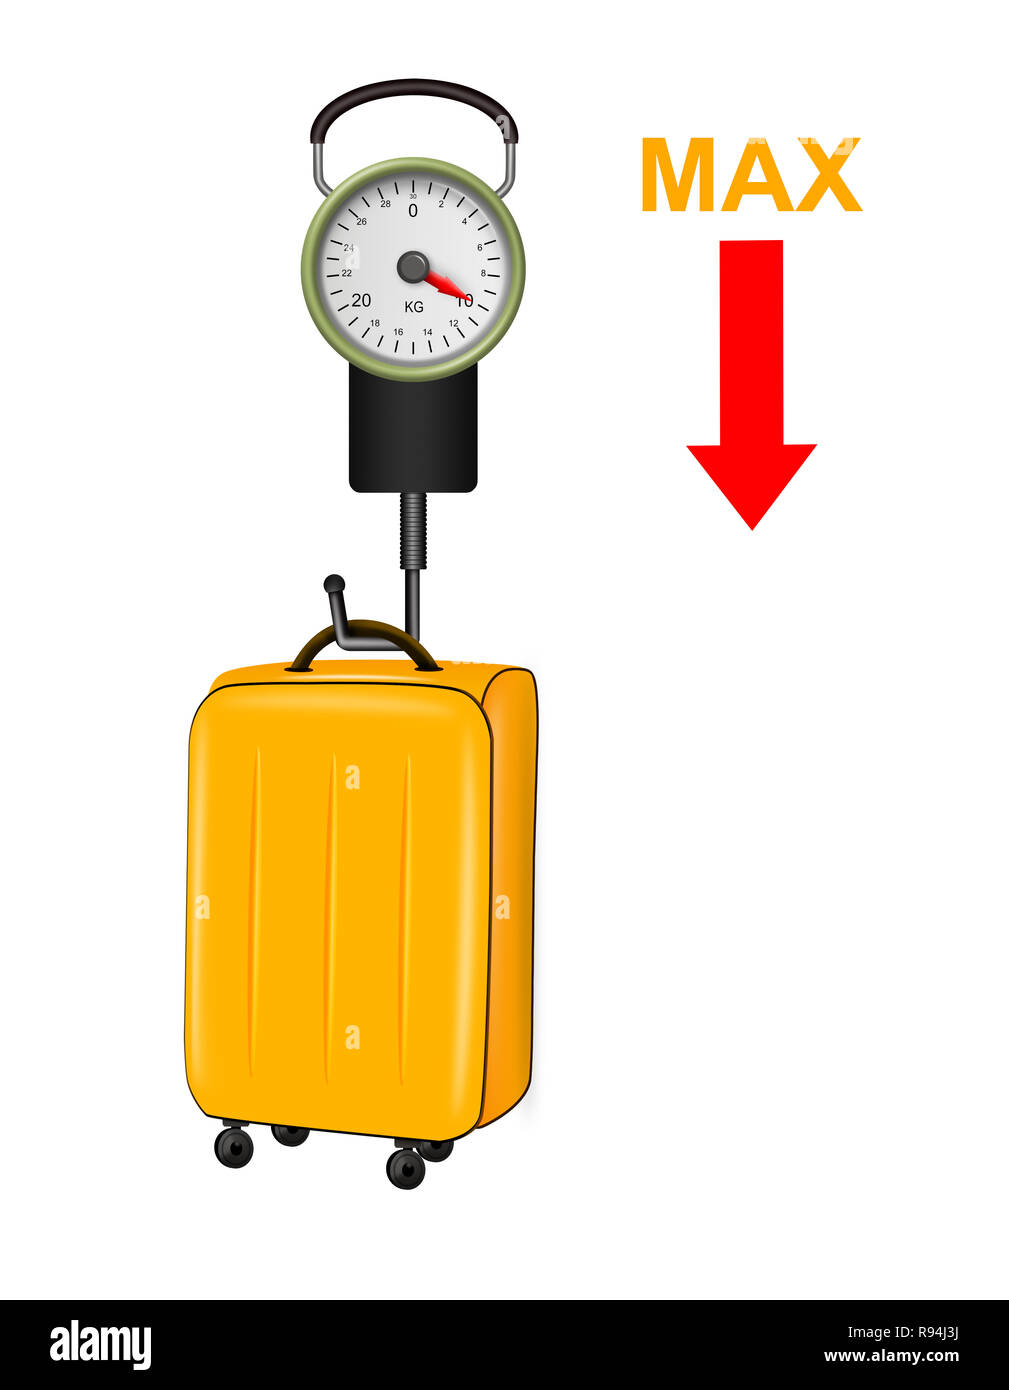 https://c8.alamy.com/comp/R94J3J/illustration-of-manual-scale-to-weigh-suitcases-at-the-airport-on-white-background-R94J3J.jpg